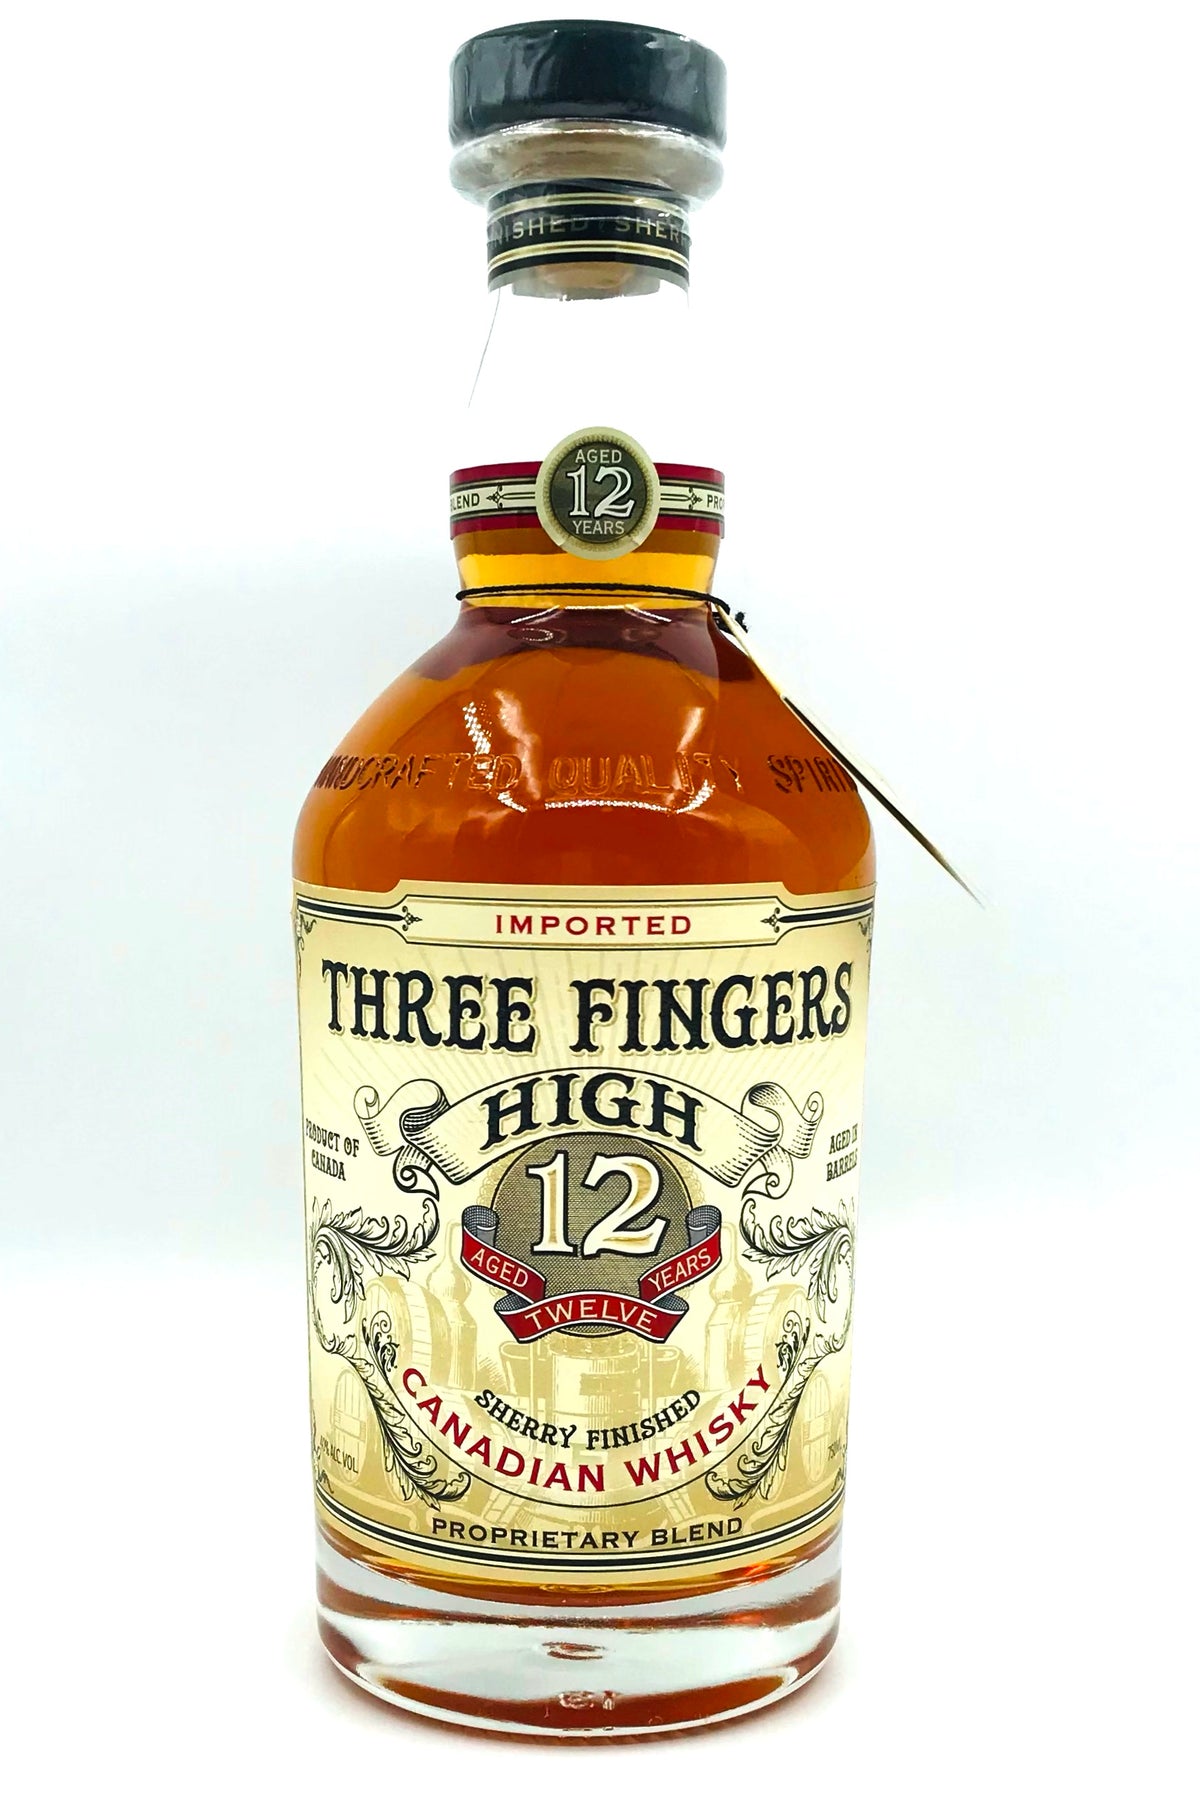 Three Fingers High 12 Year Old Sherry Finished Canadian Whisky